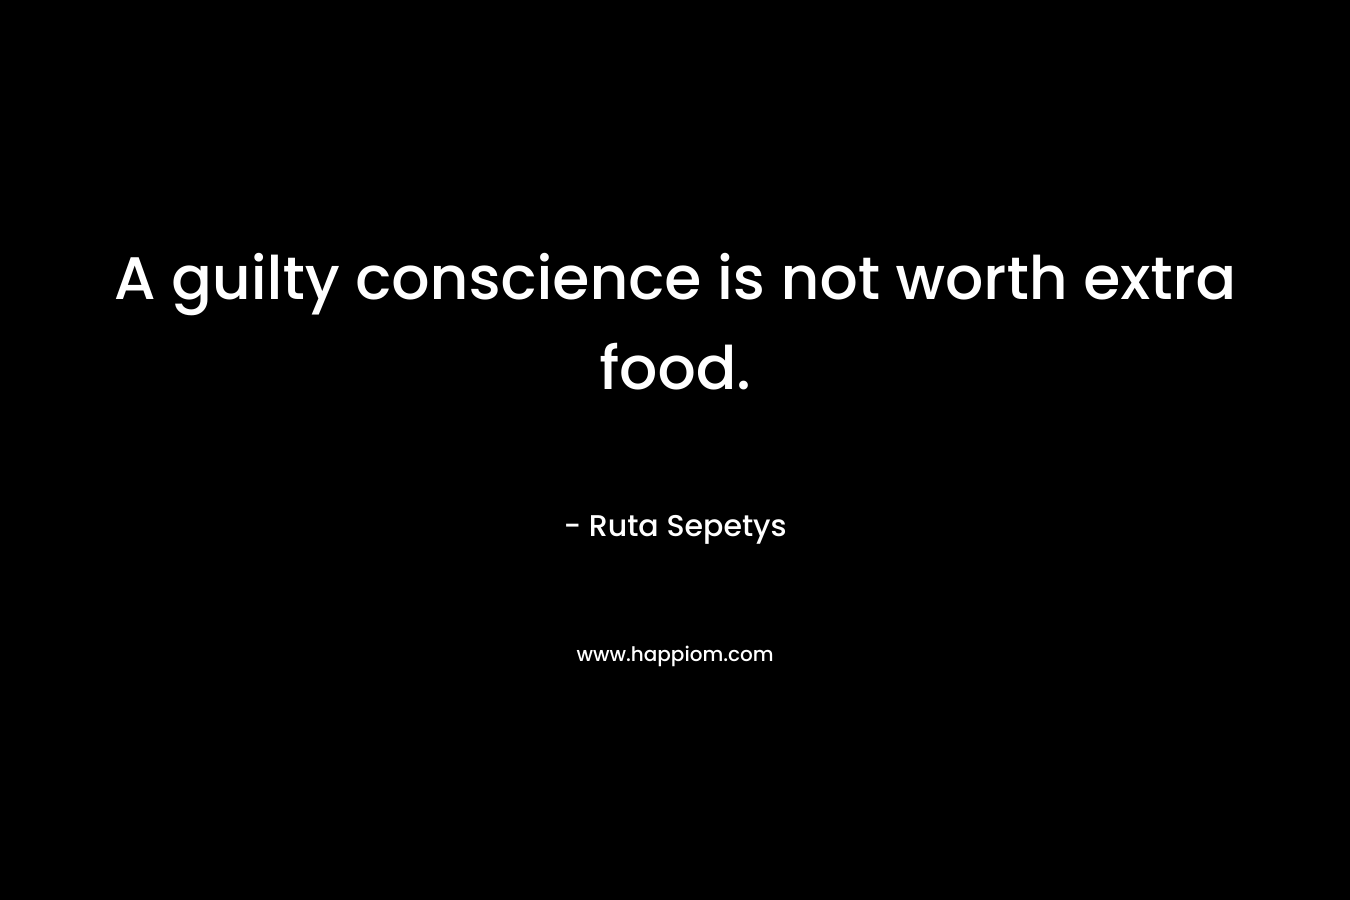 A guilty conscience is not worth extra food.